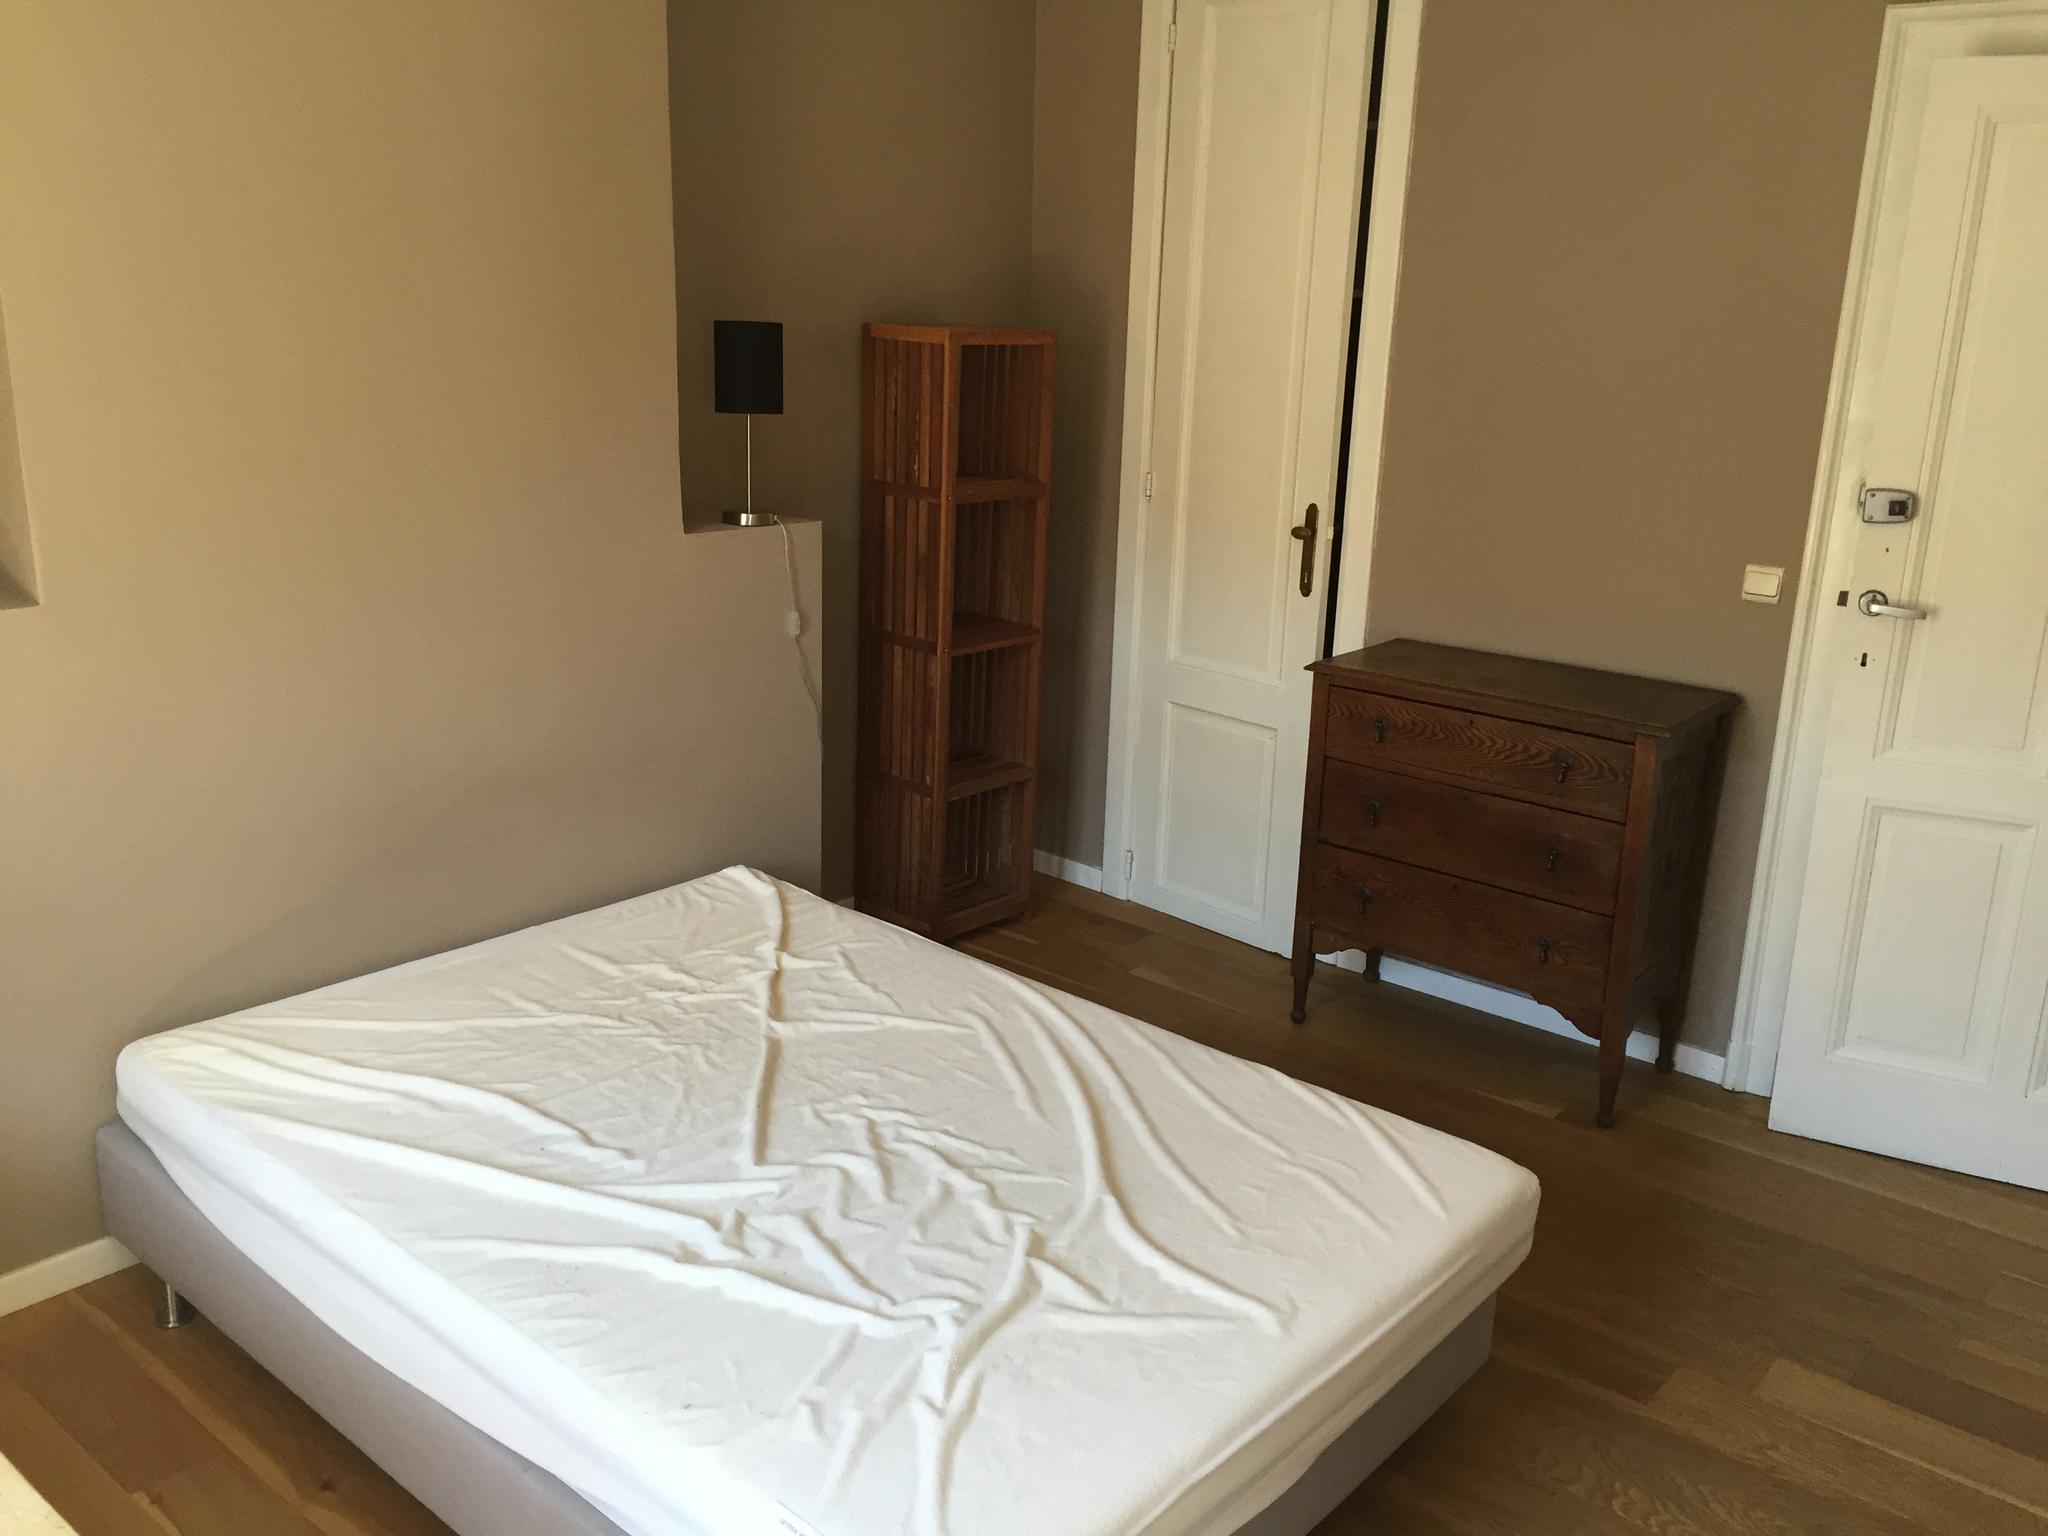 Gravelines - Shared apartment in Brussels